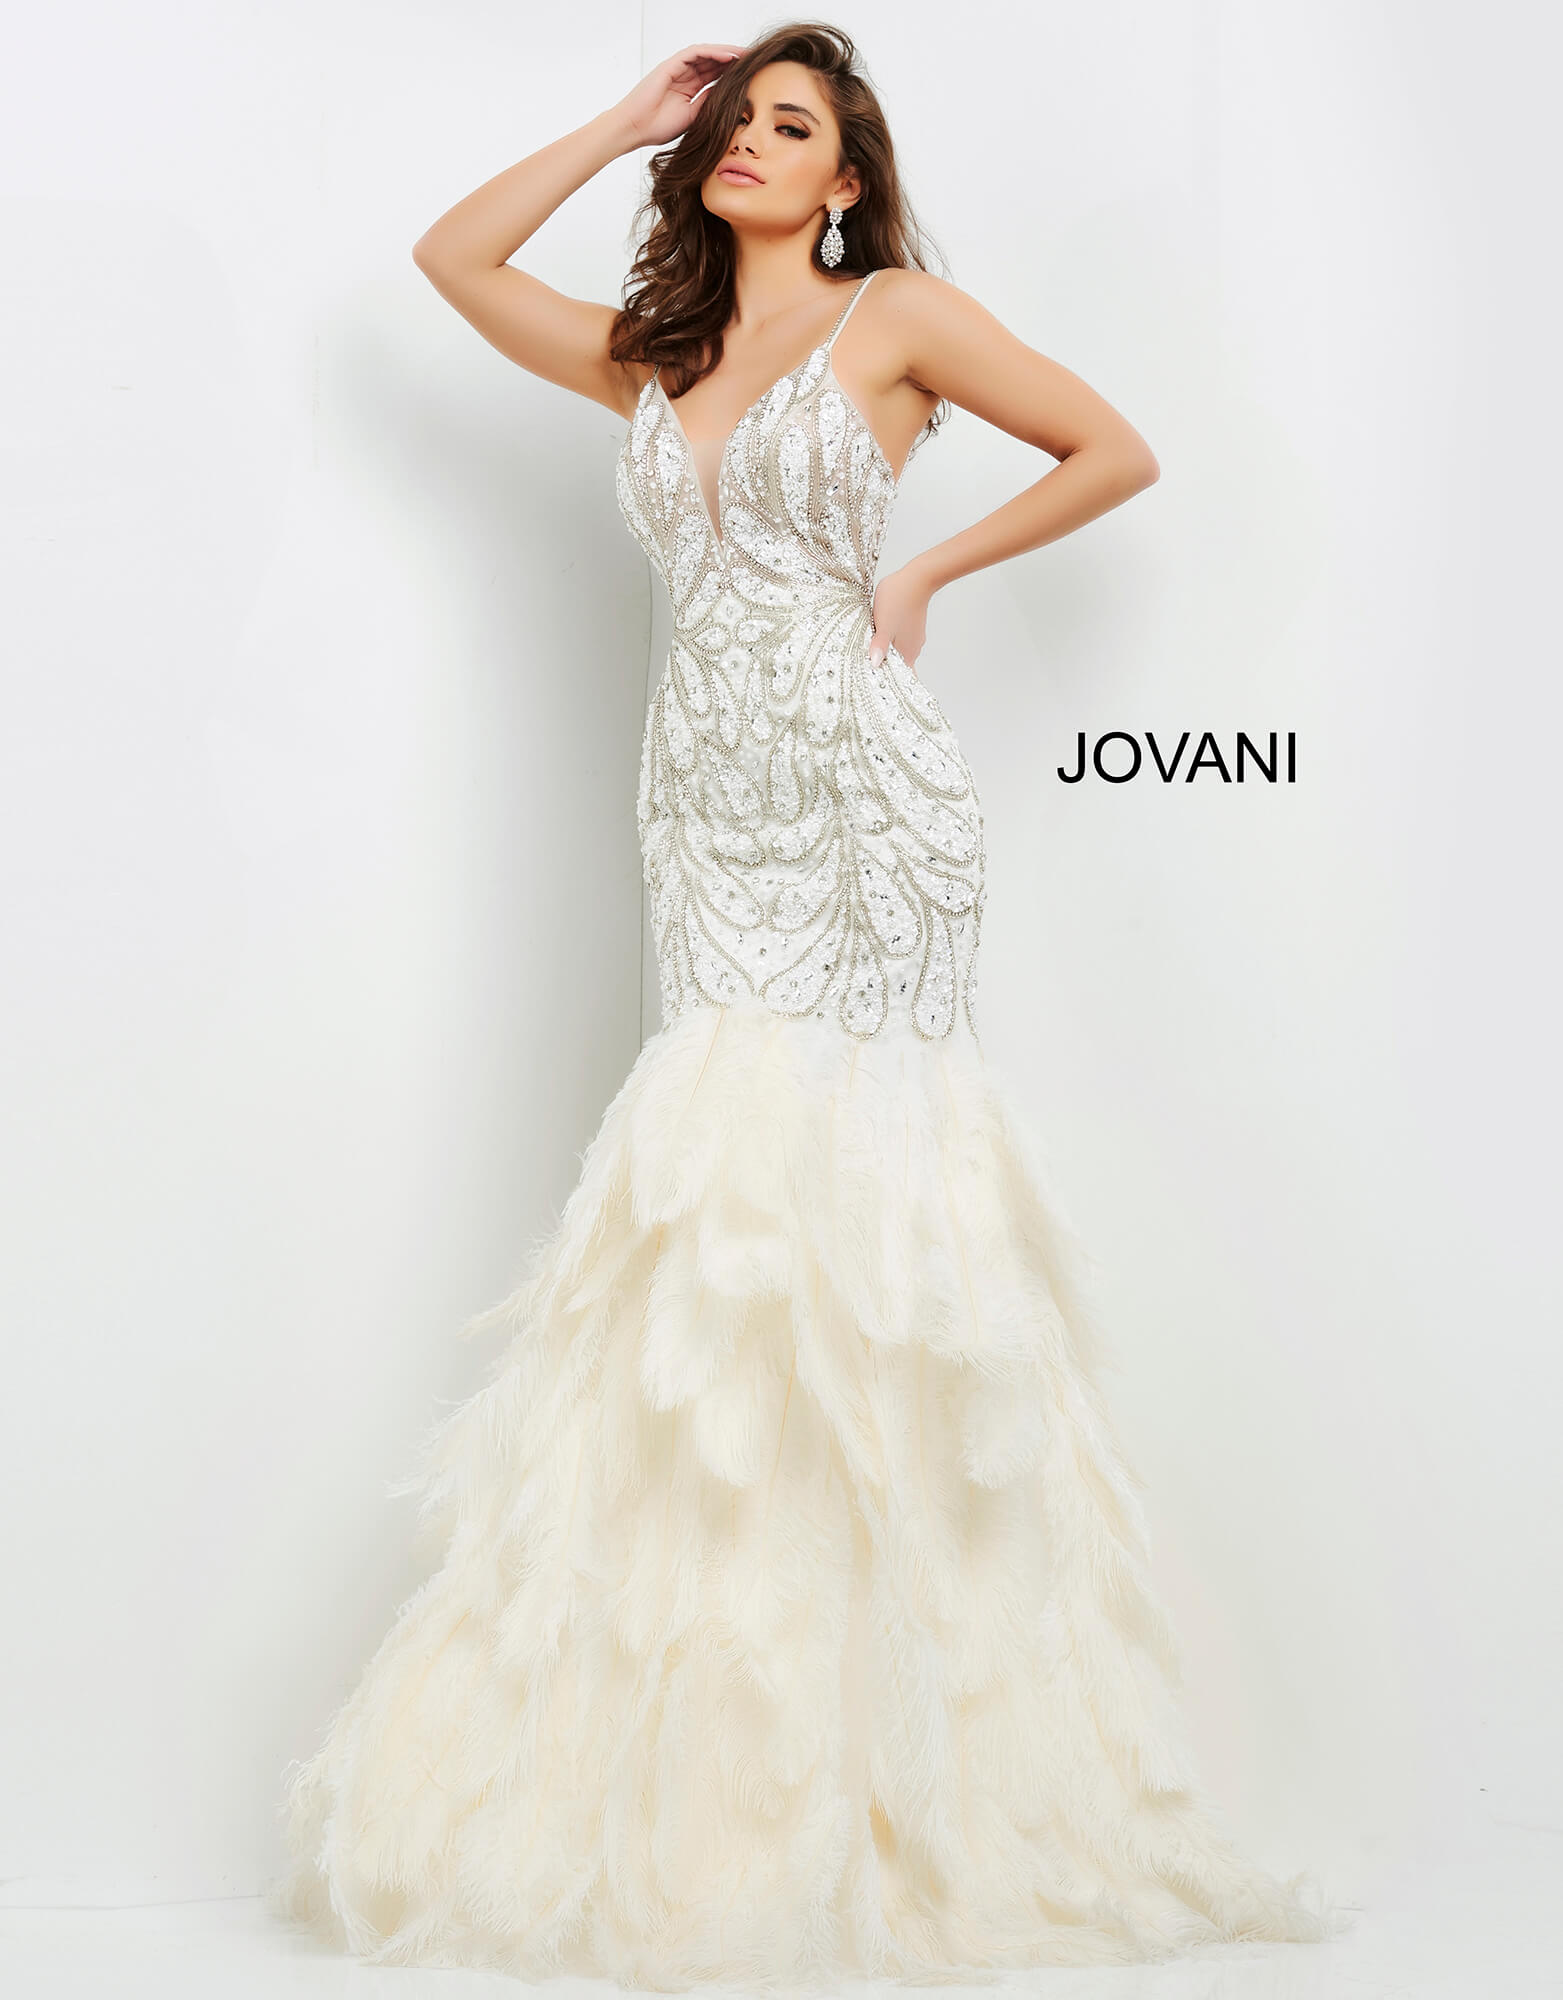 Jovani 04625 Form fitting floor length dress with mermaid feather bottom